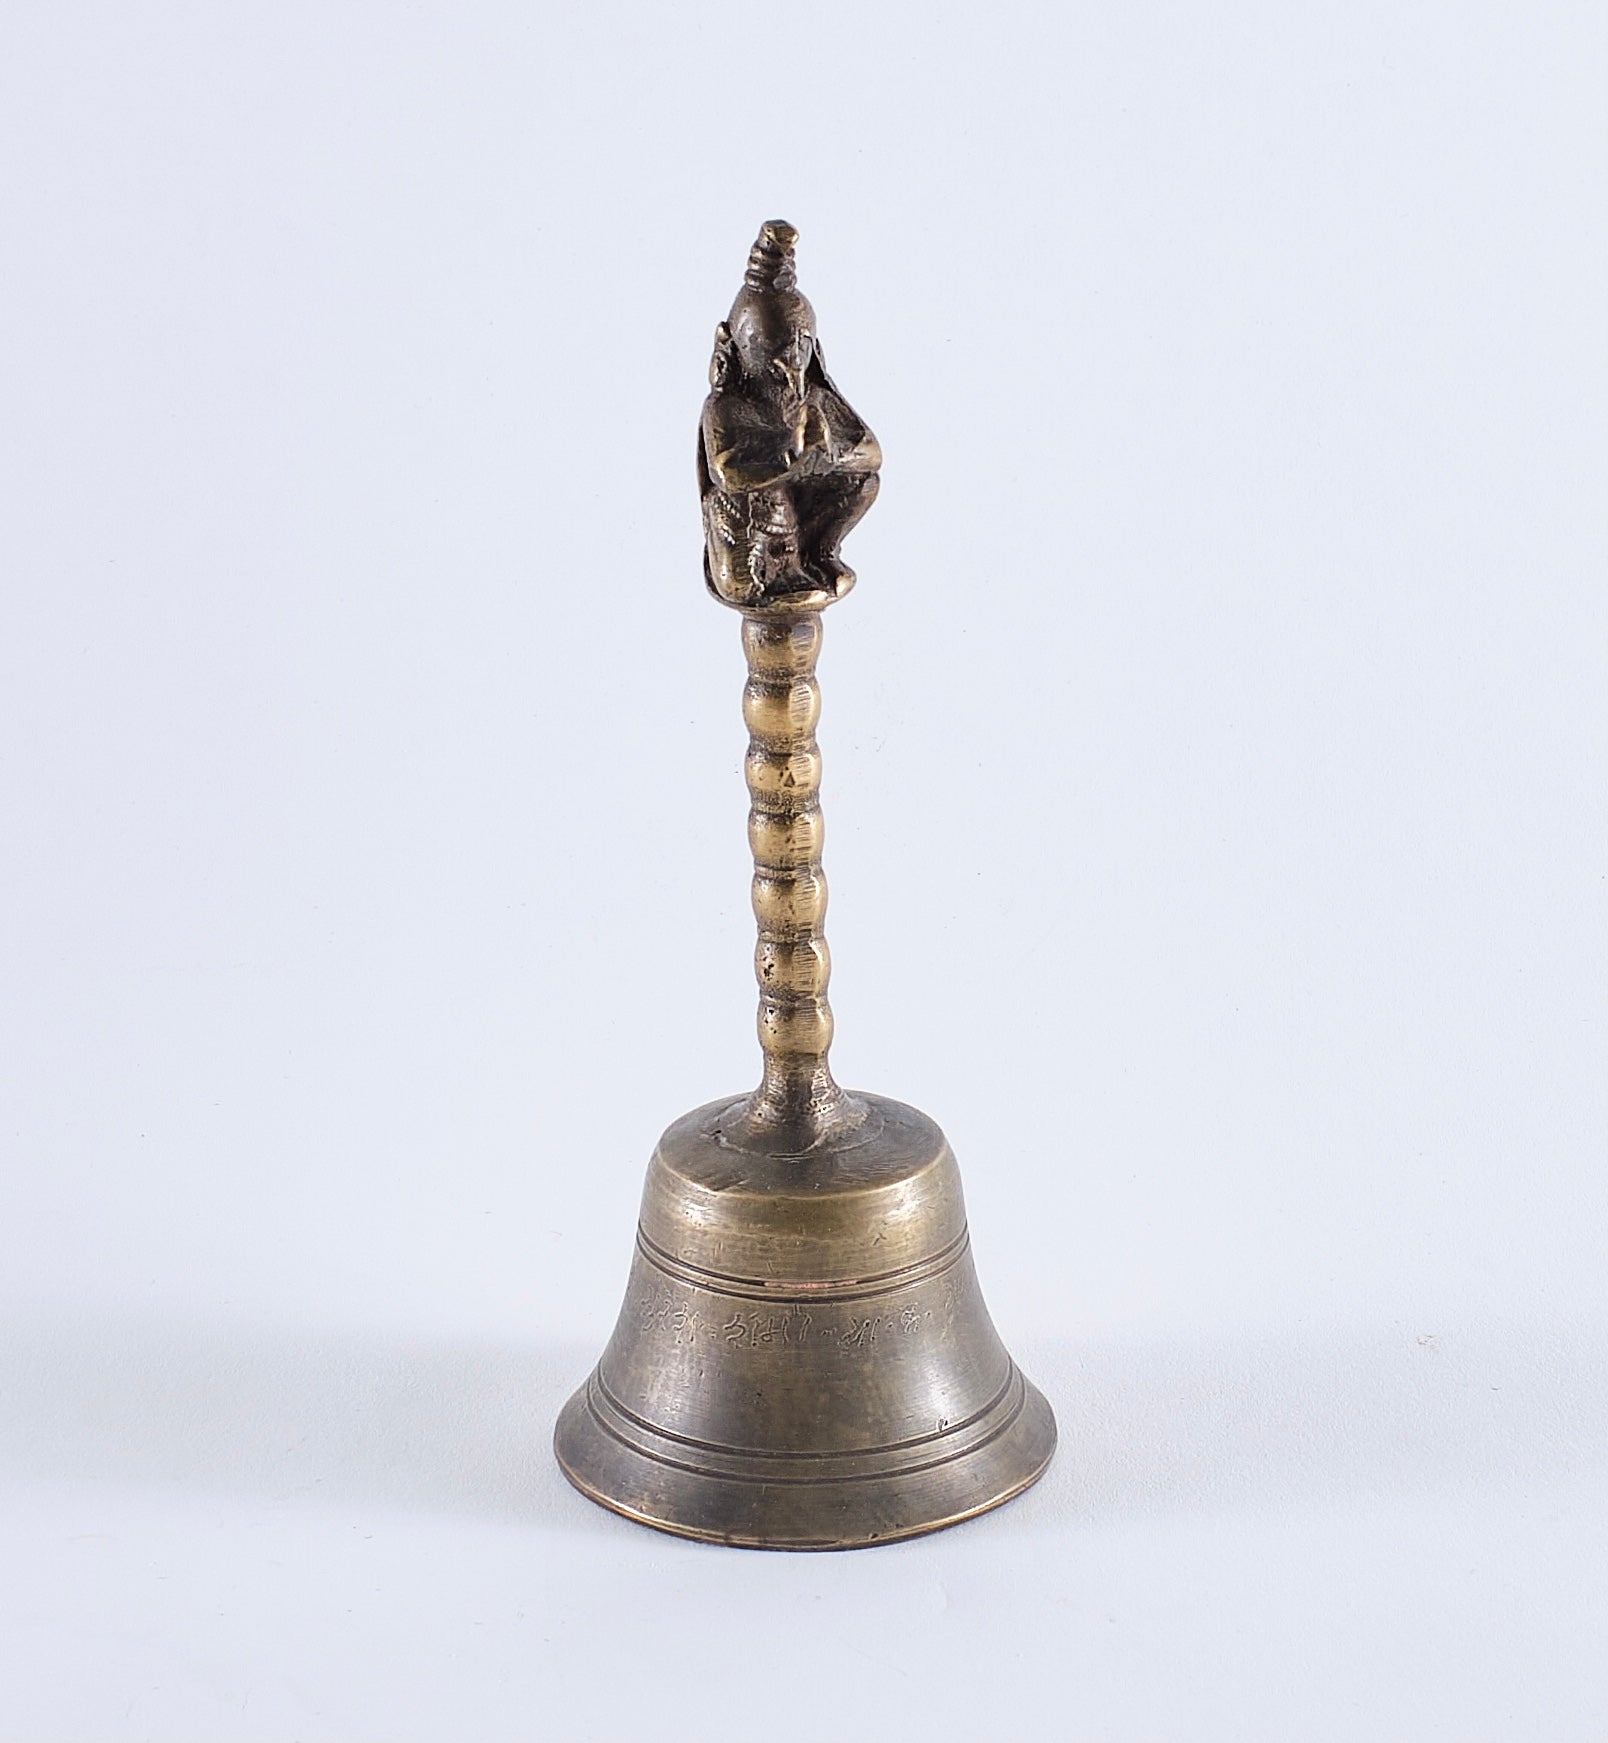 Metal Bell from India